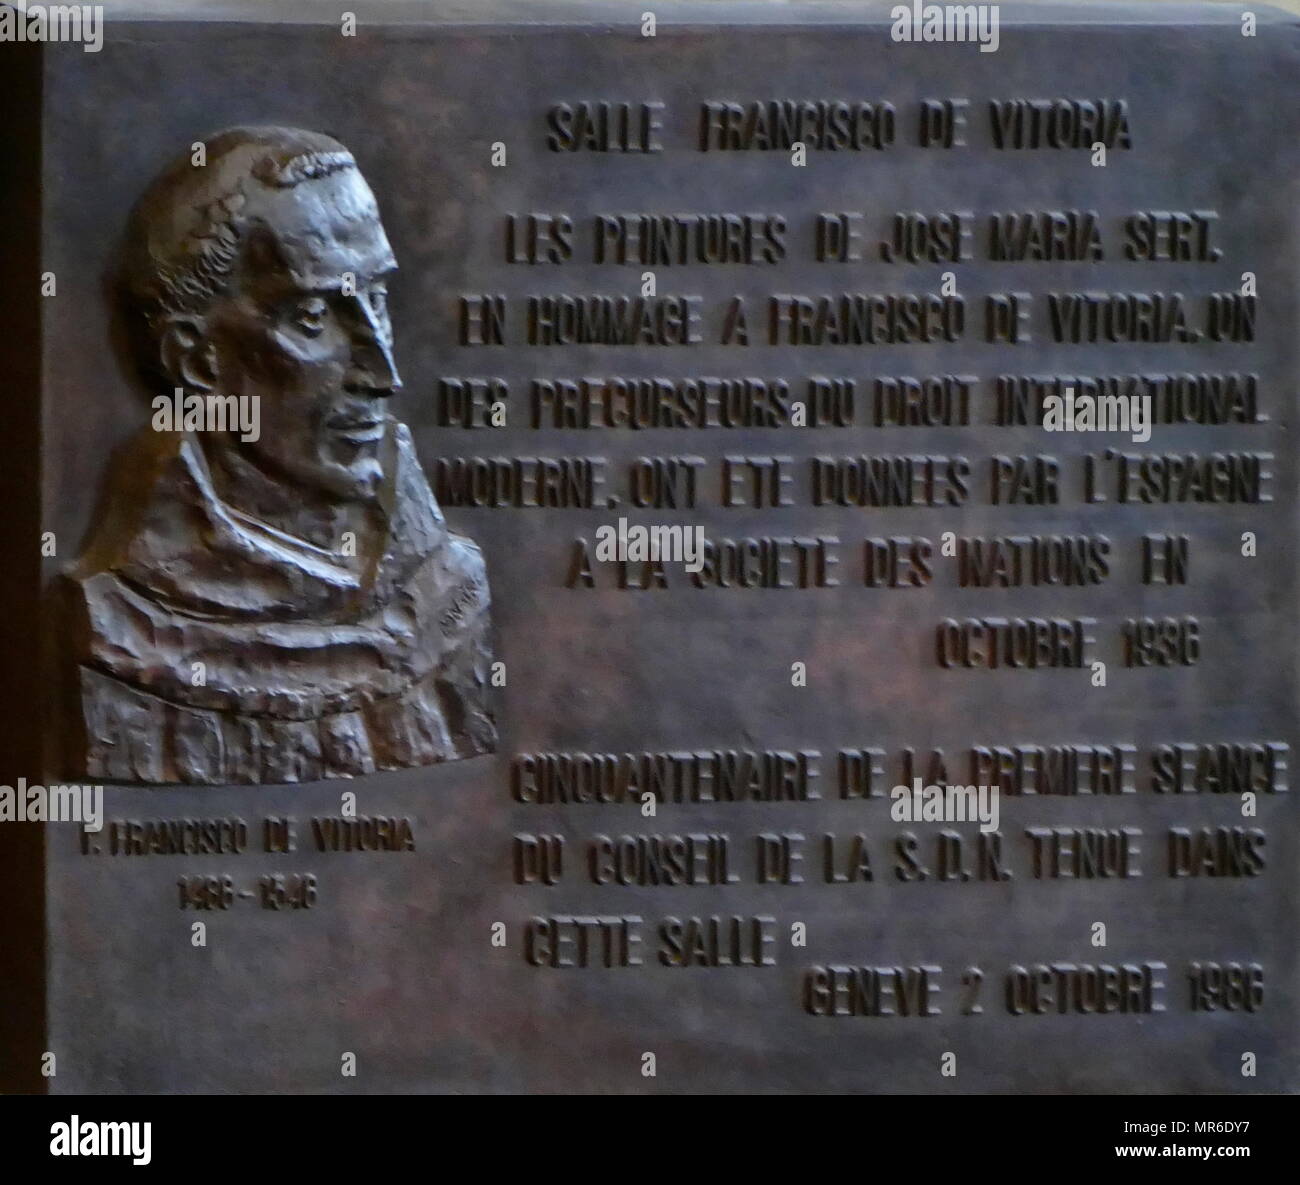 Francisco de Vitoria (1486-1546) plaque outside the Hall named after him at the UN, In Geneva. The council chamber, “Salle du Conseil,” was named after him. It was built for the League of Nations, and is the present meeting place of the Conference on Disarmament. Francisco de Vitoria was a Roman Catholic philosopher, theologian and jurist of Renaissance Spain. He is the founder of the tradition in philosophy known as the School of Salamanca, noted especially for his contributions to the theory of just war and international law Stock Photo